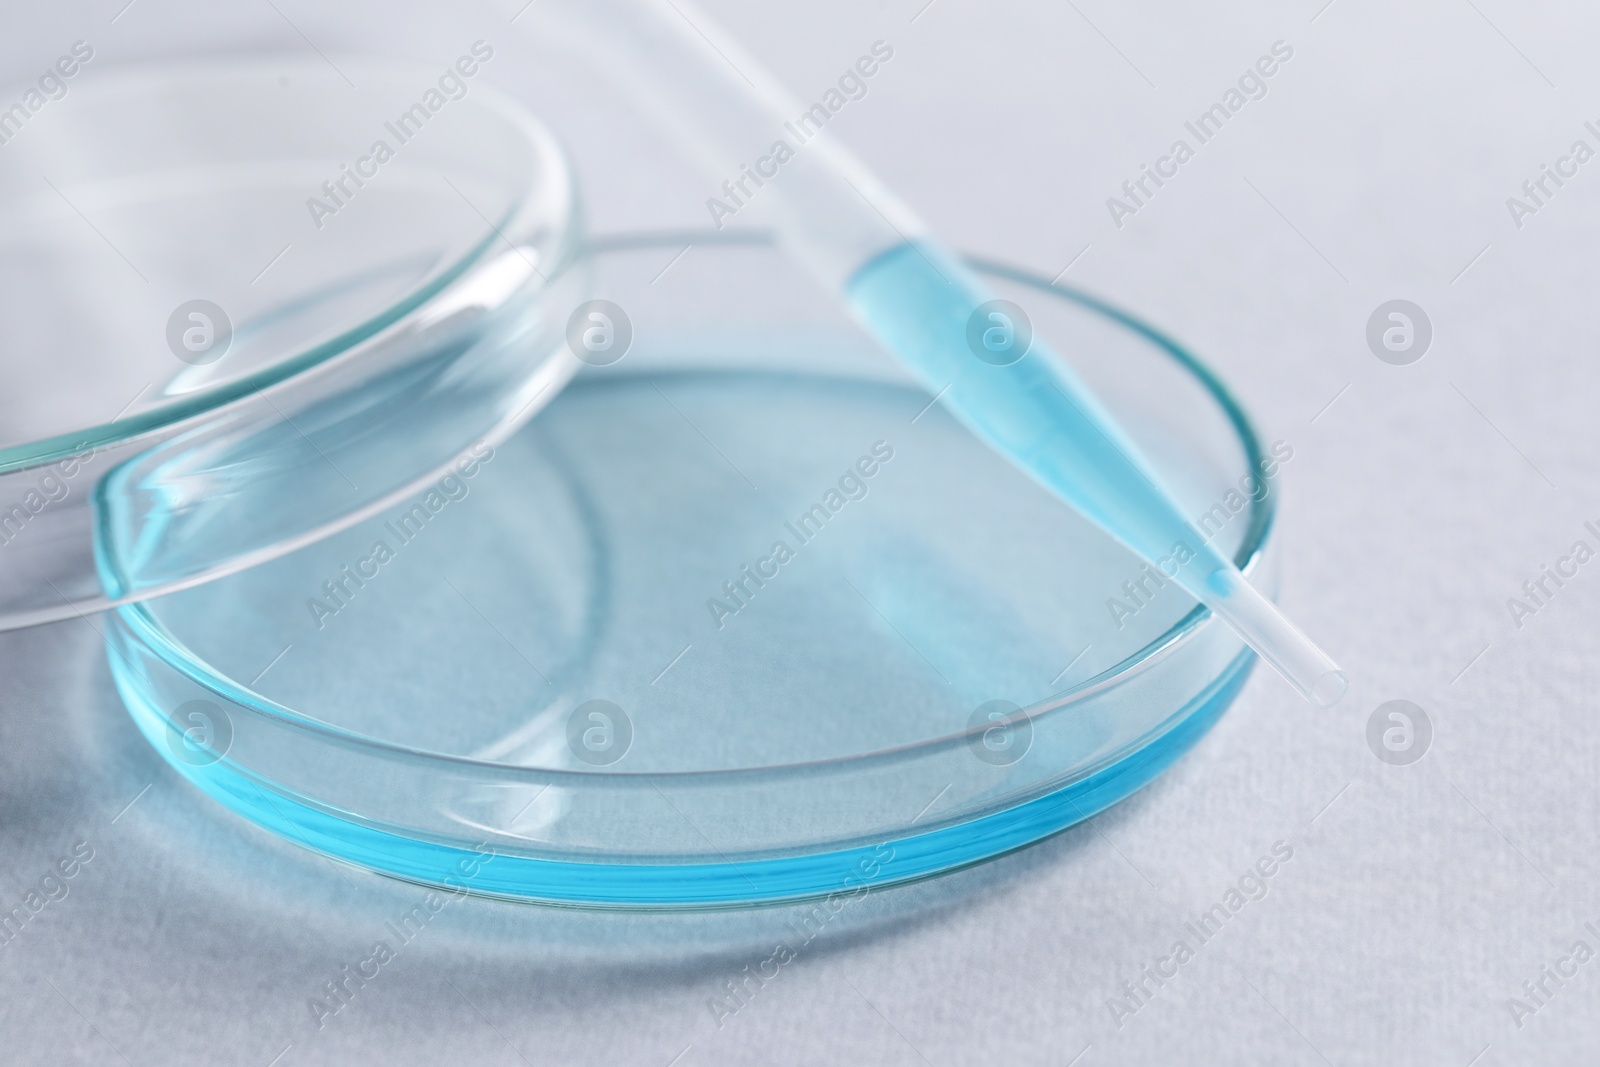 Photo of Transfer pipette and petri dish on white background, closeup